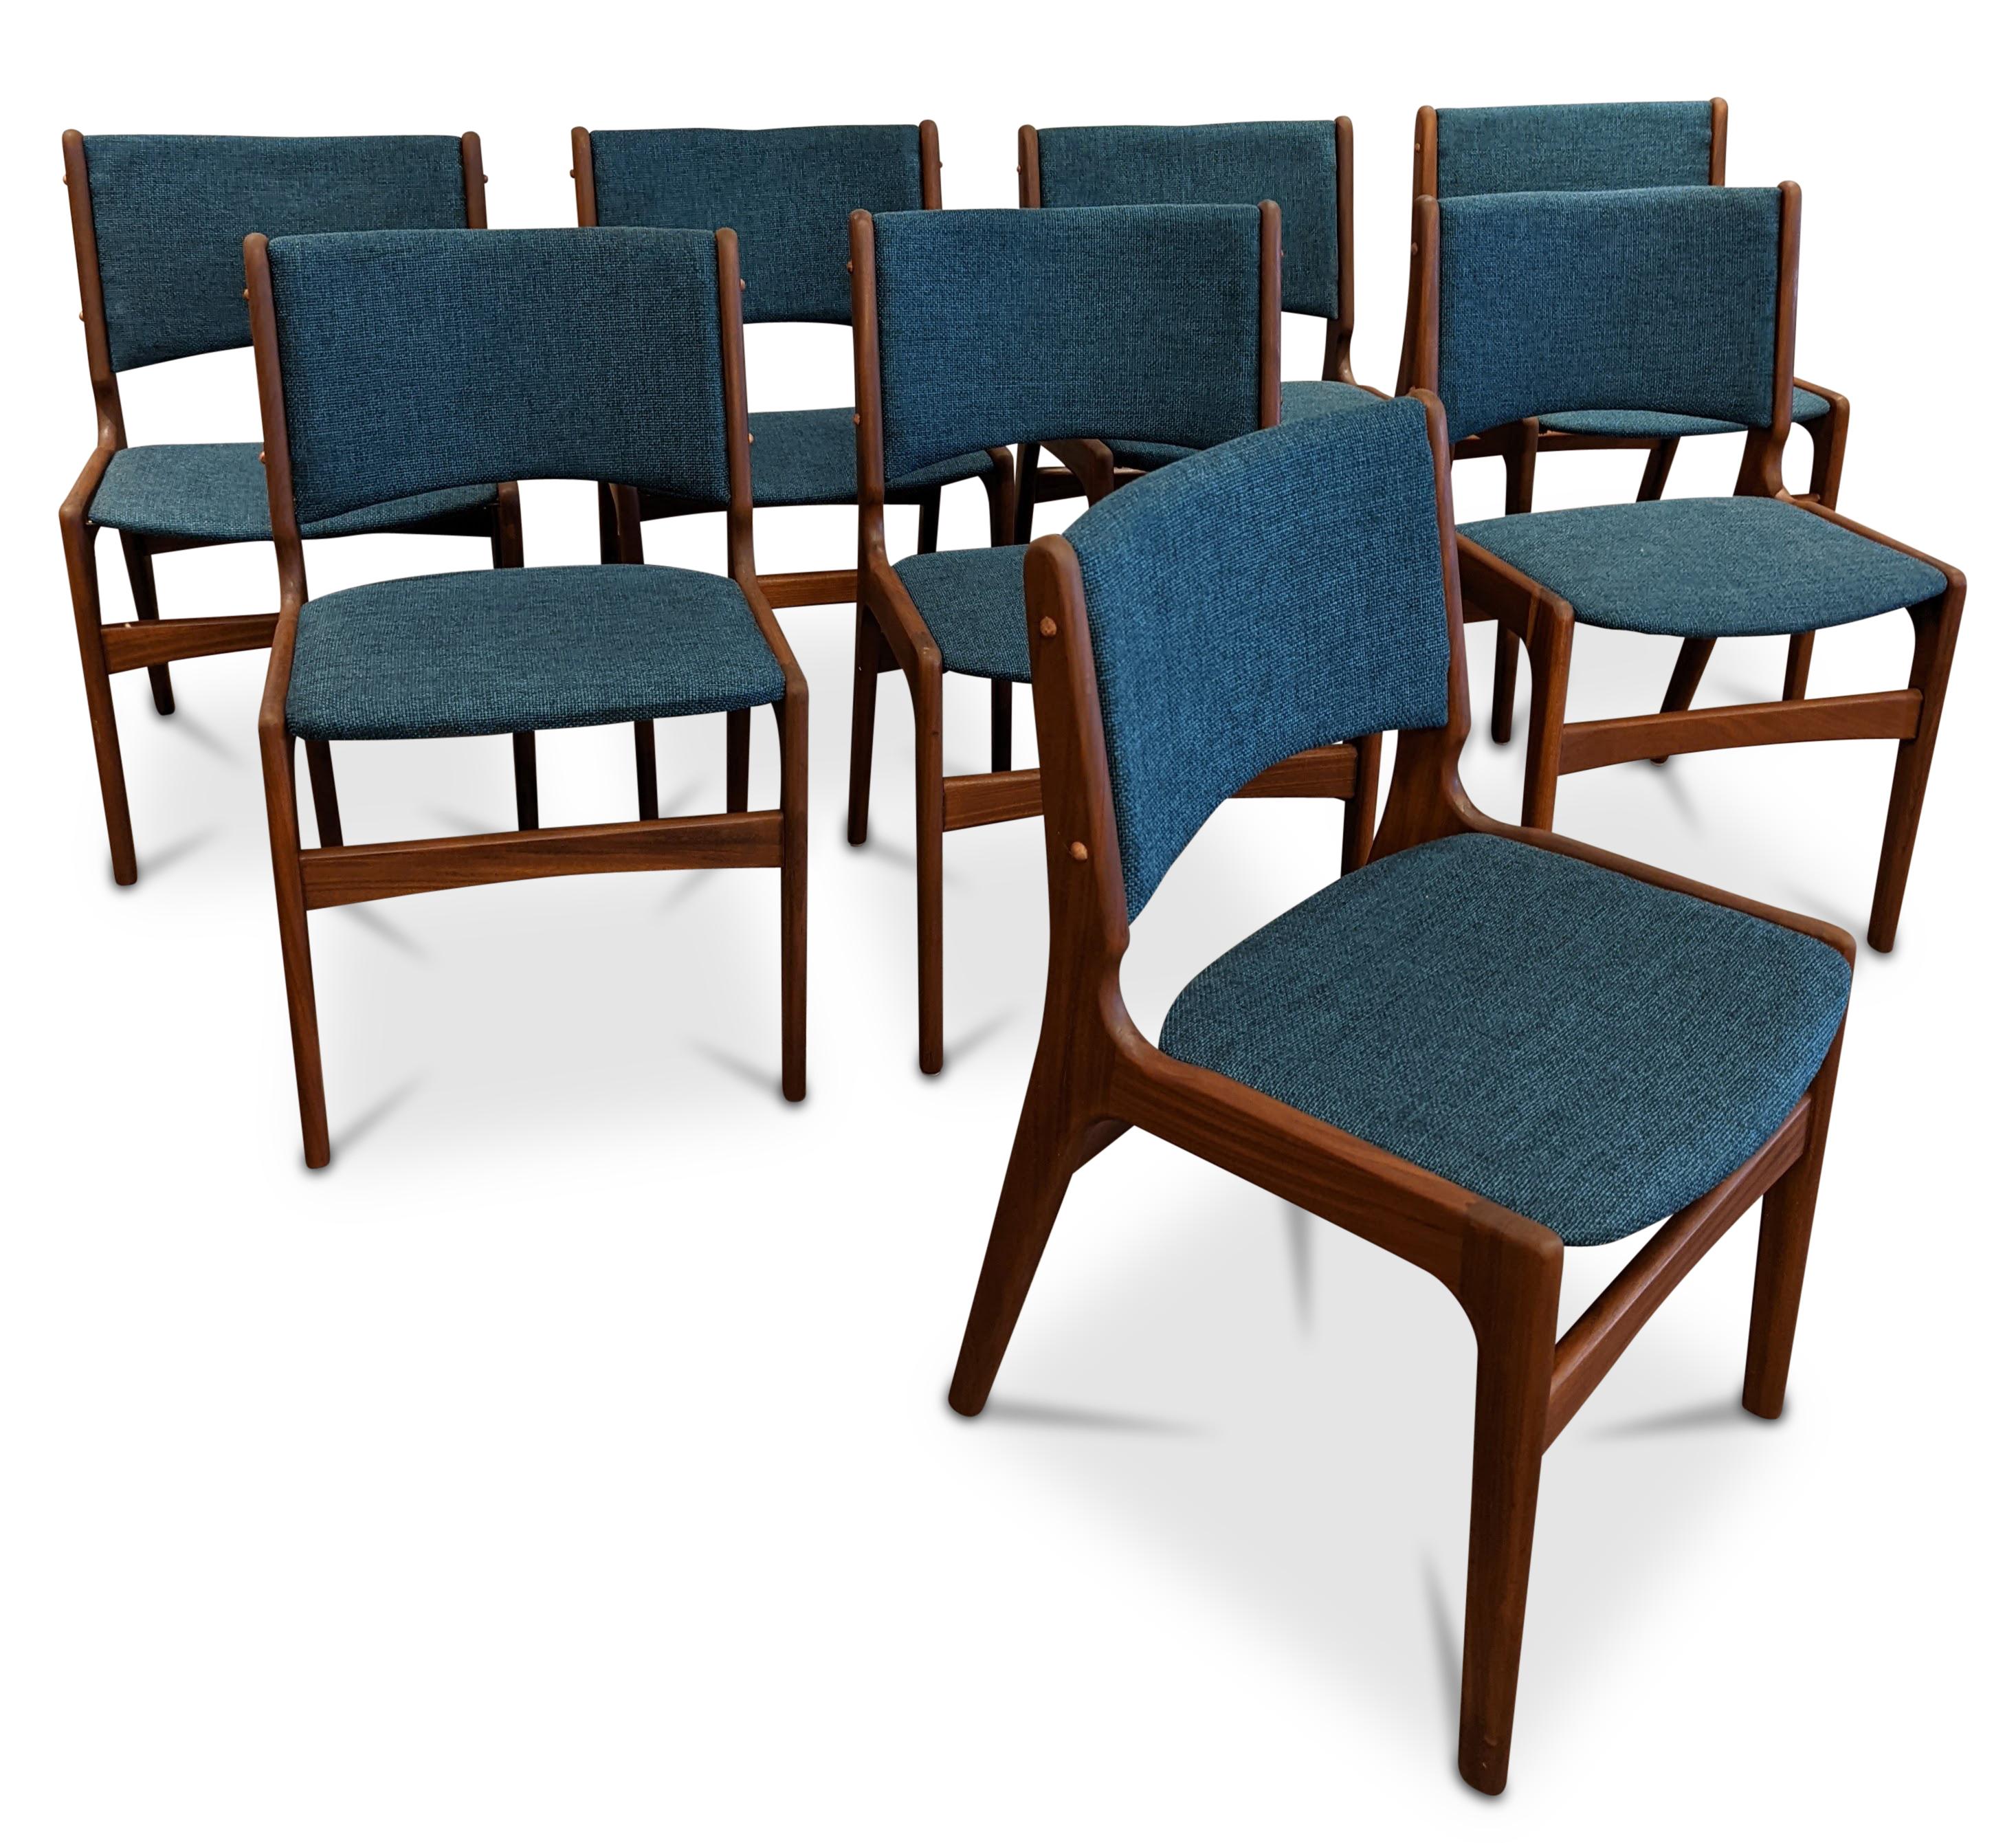 Upholstery appears blue on the photos' but are teal. 
Vintage Danish mid century modern, made in the 1950's - Recently refurbished

There is a science behind Danish Modern design. The world famous school of design in Copenhagen have made numbers